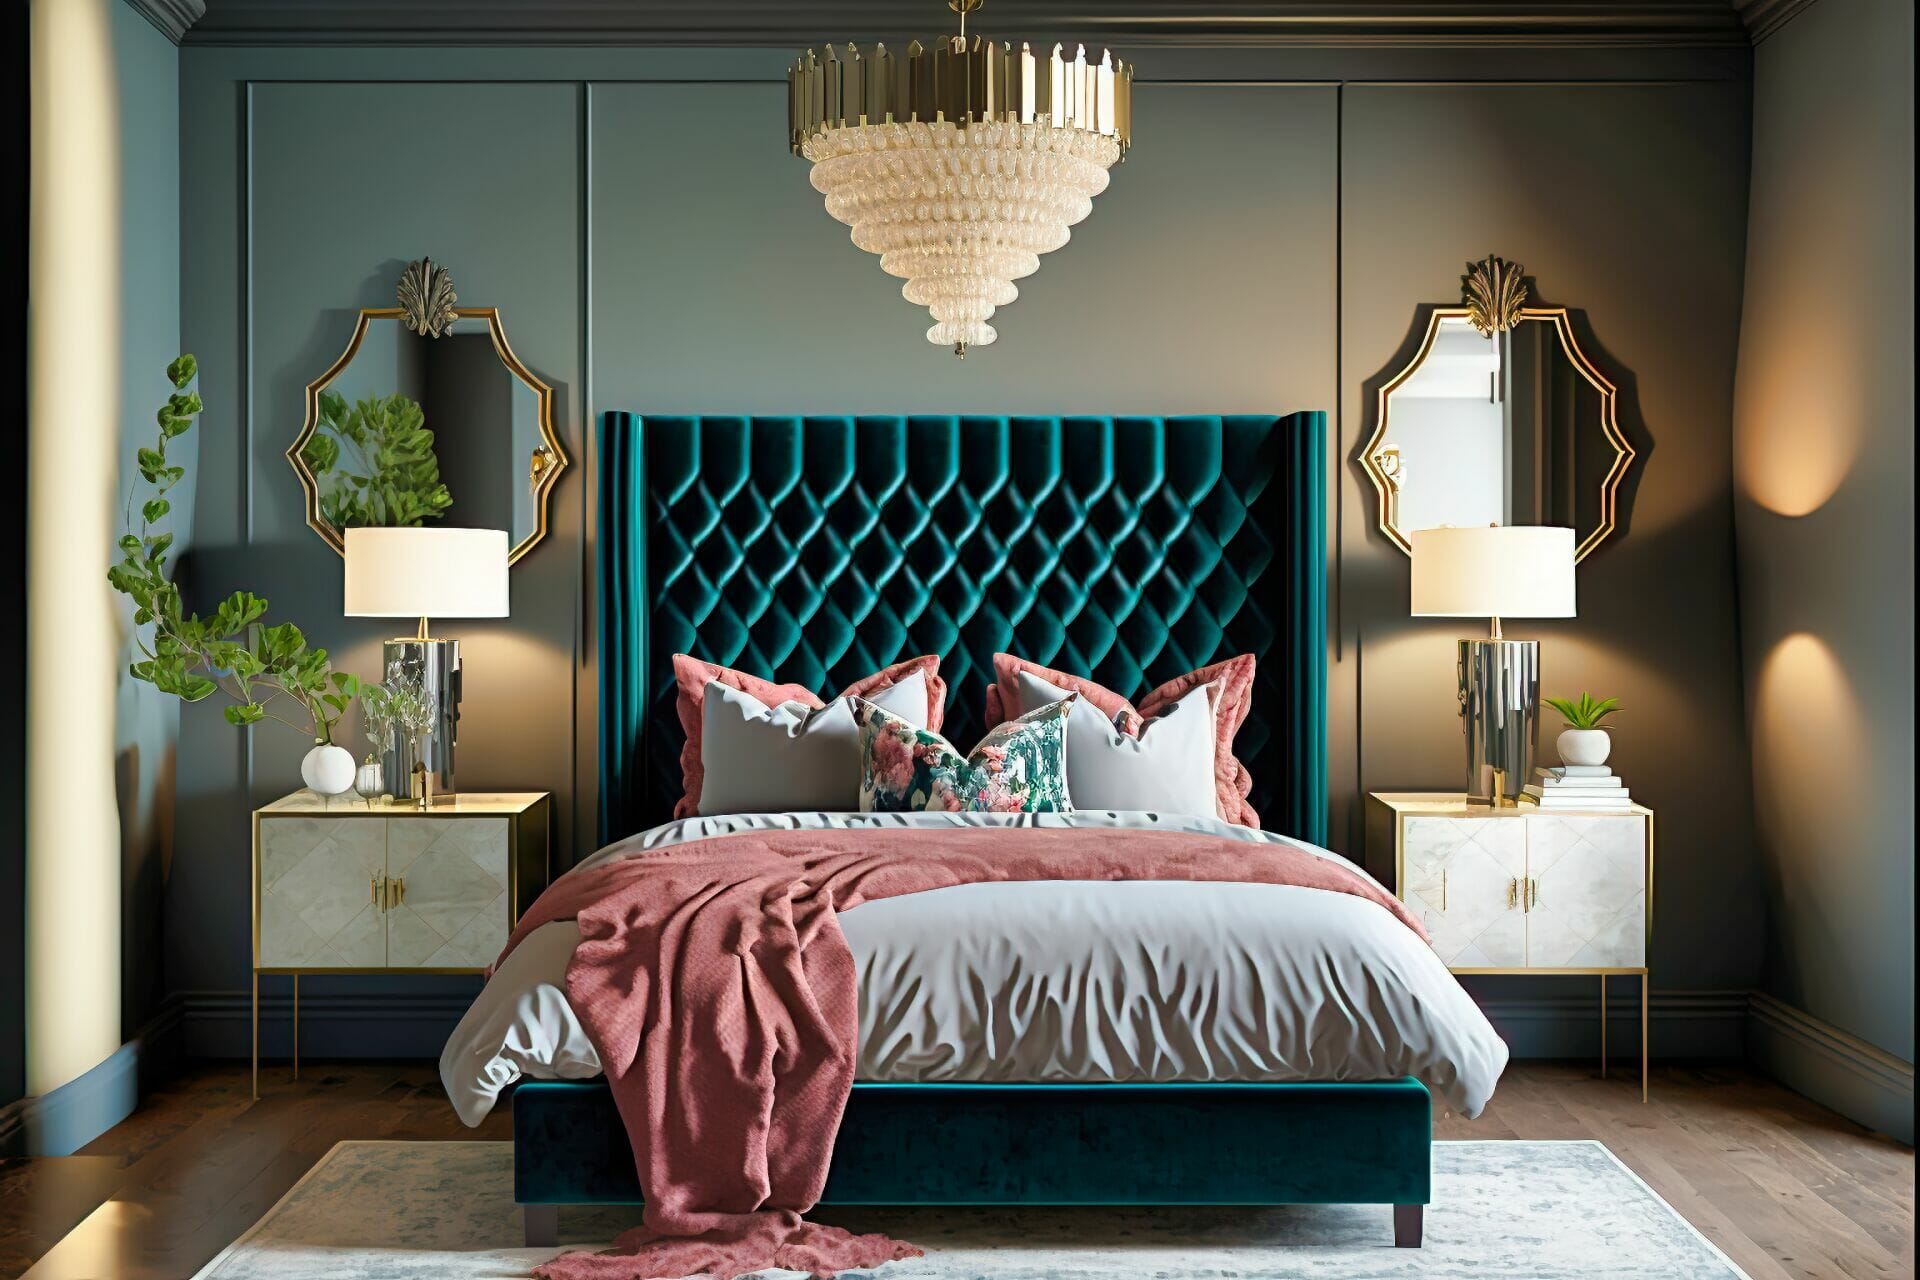 Mid-Century Modern Bedroom – An Opulent Modern Bedroom Featuring A Tufted Velvet Bed Frame, A Mirrored Nightstand, And A Chandelier Hanging From The Ceiling.